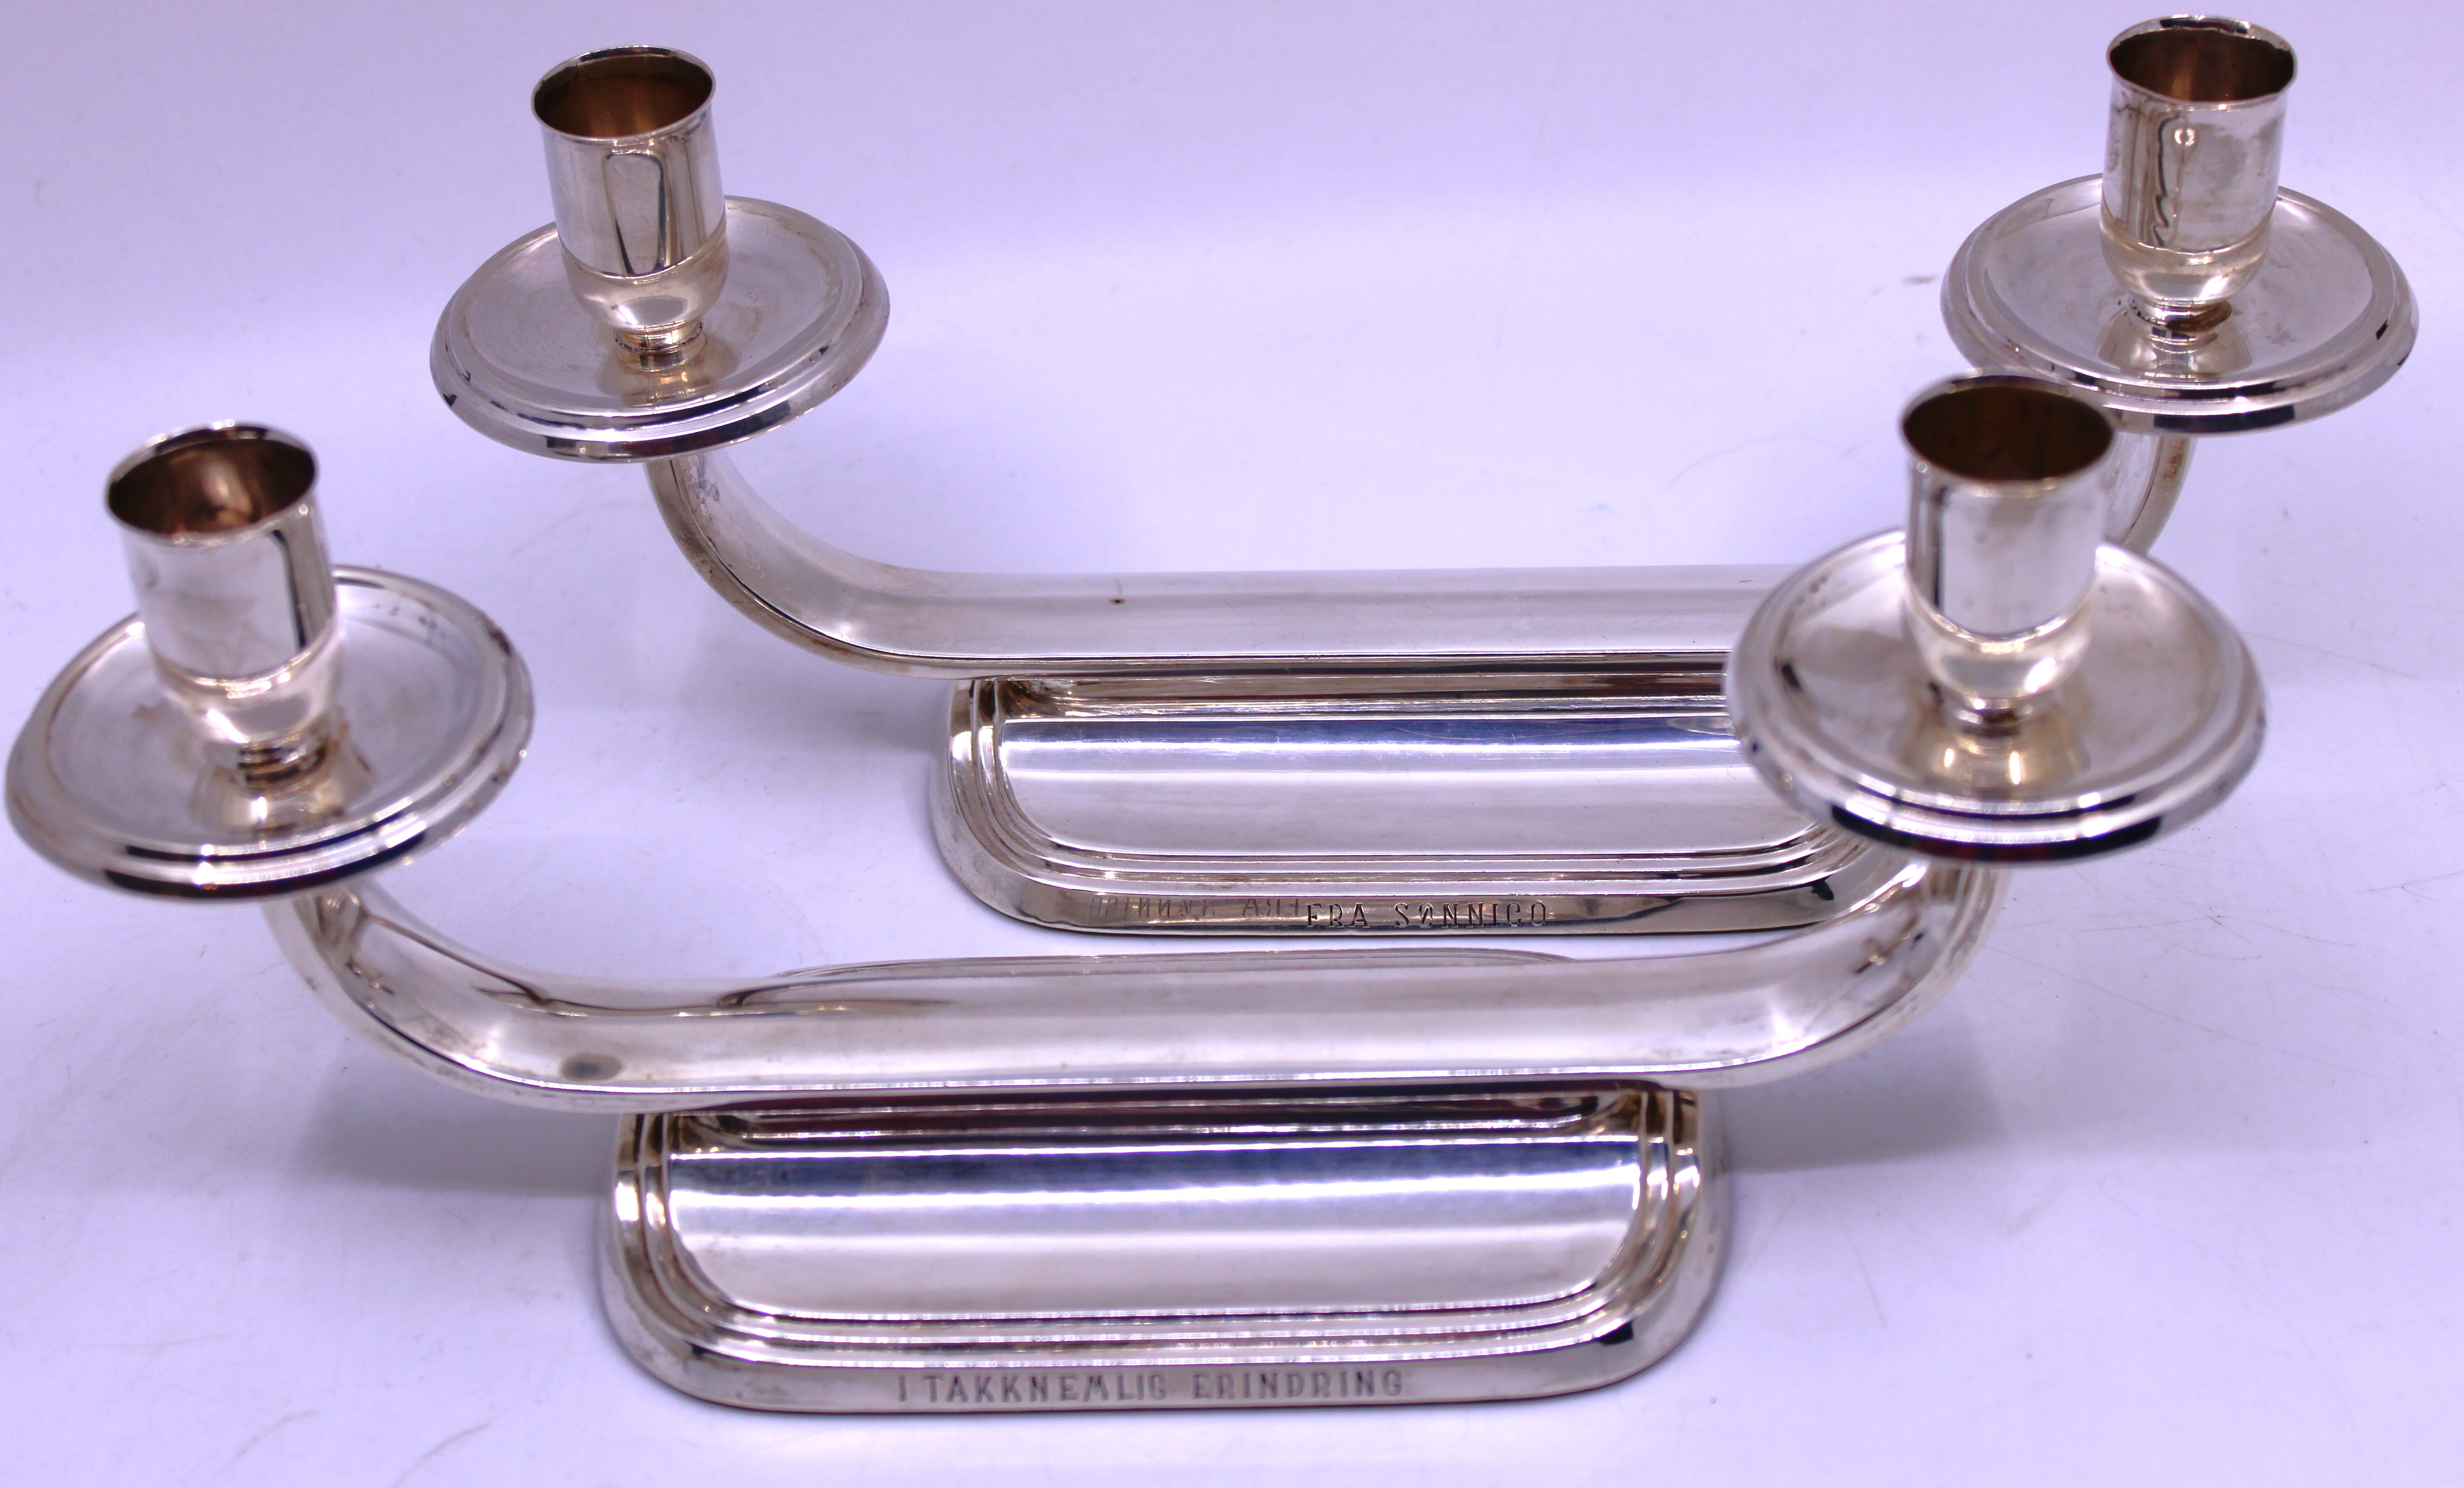 Rare David Anderson Norwegian Sterling Silver pair of Candelabra Candle Holders.  These are